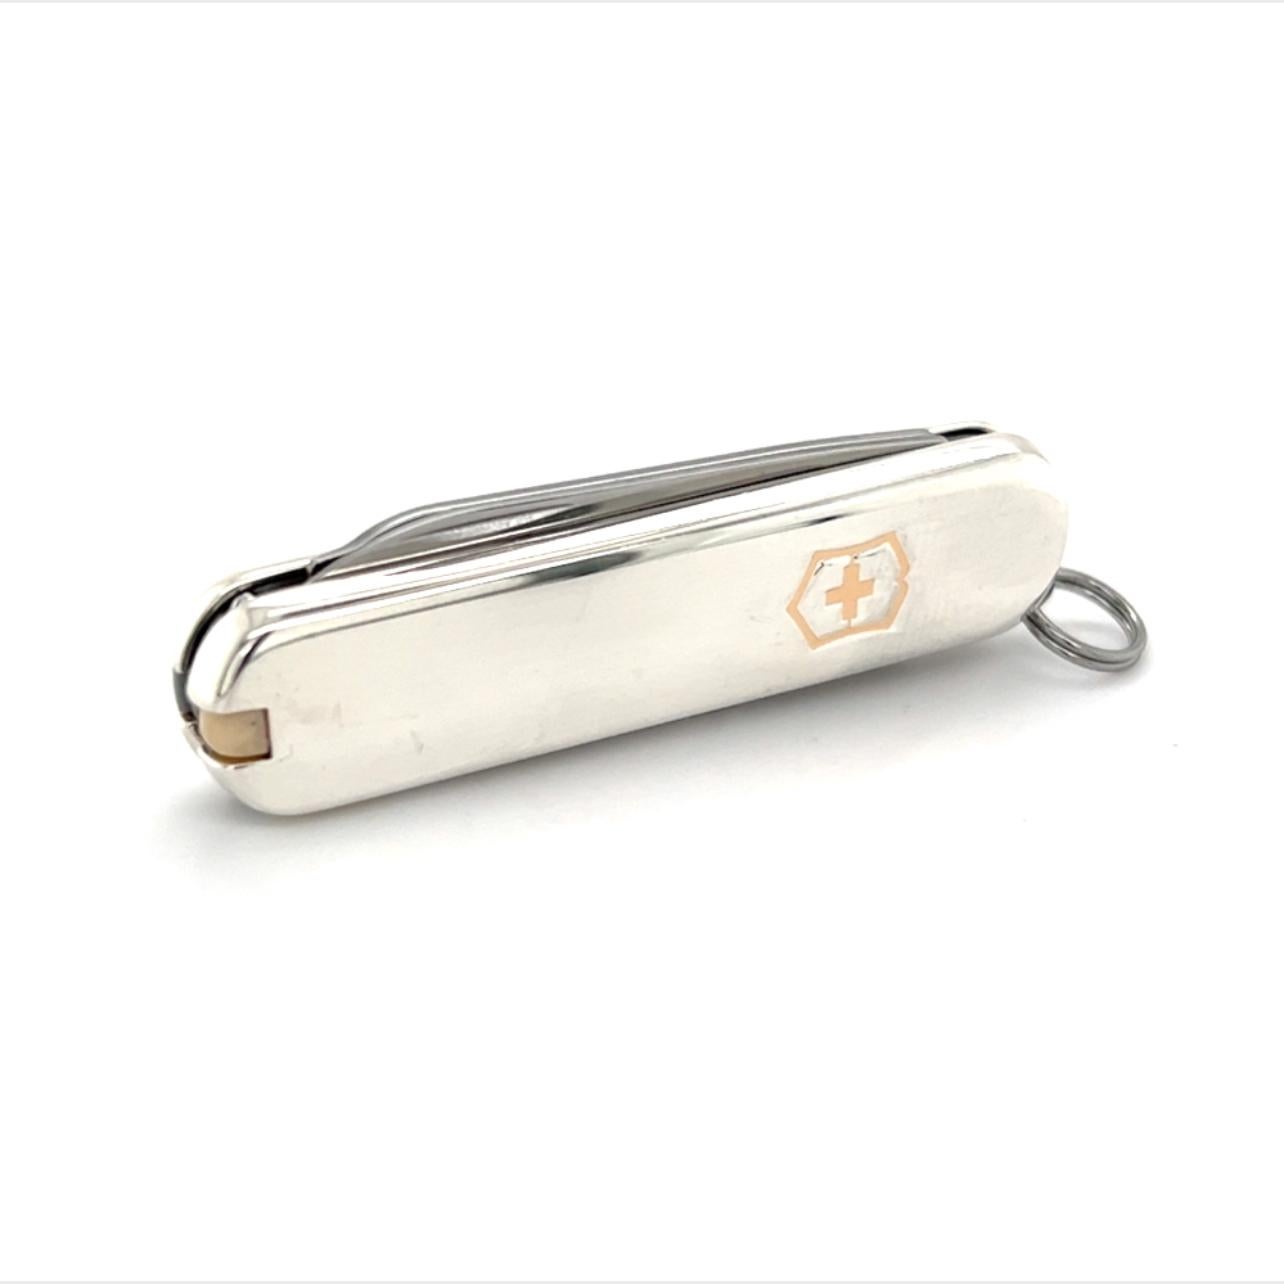 Tiffany & Co Estate Swiss Army Victorinox Knife 18k Gold Sterling Silver TIF244

This elegant Authentic Tiffany & Co pocket knife is made of sterling silver & 18k yellow gold and has a weight of 45.2 Grams.

TRUSTED SELLER SINCE 2002

PLEASE SEE OUR